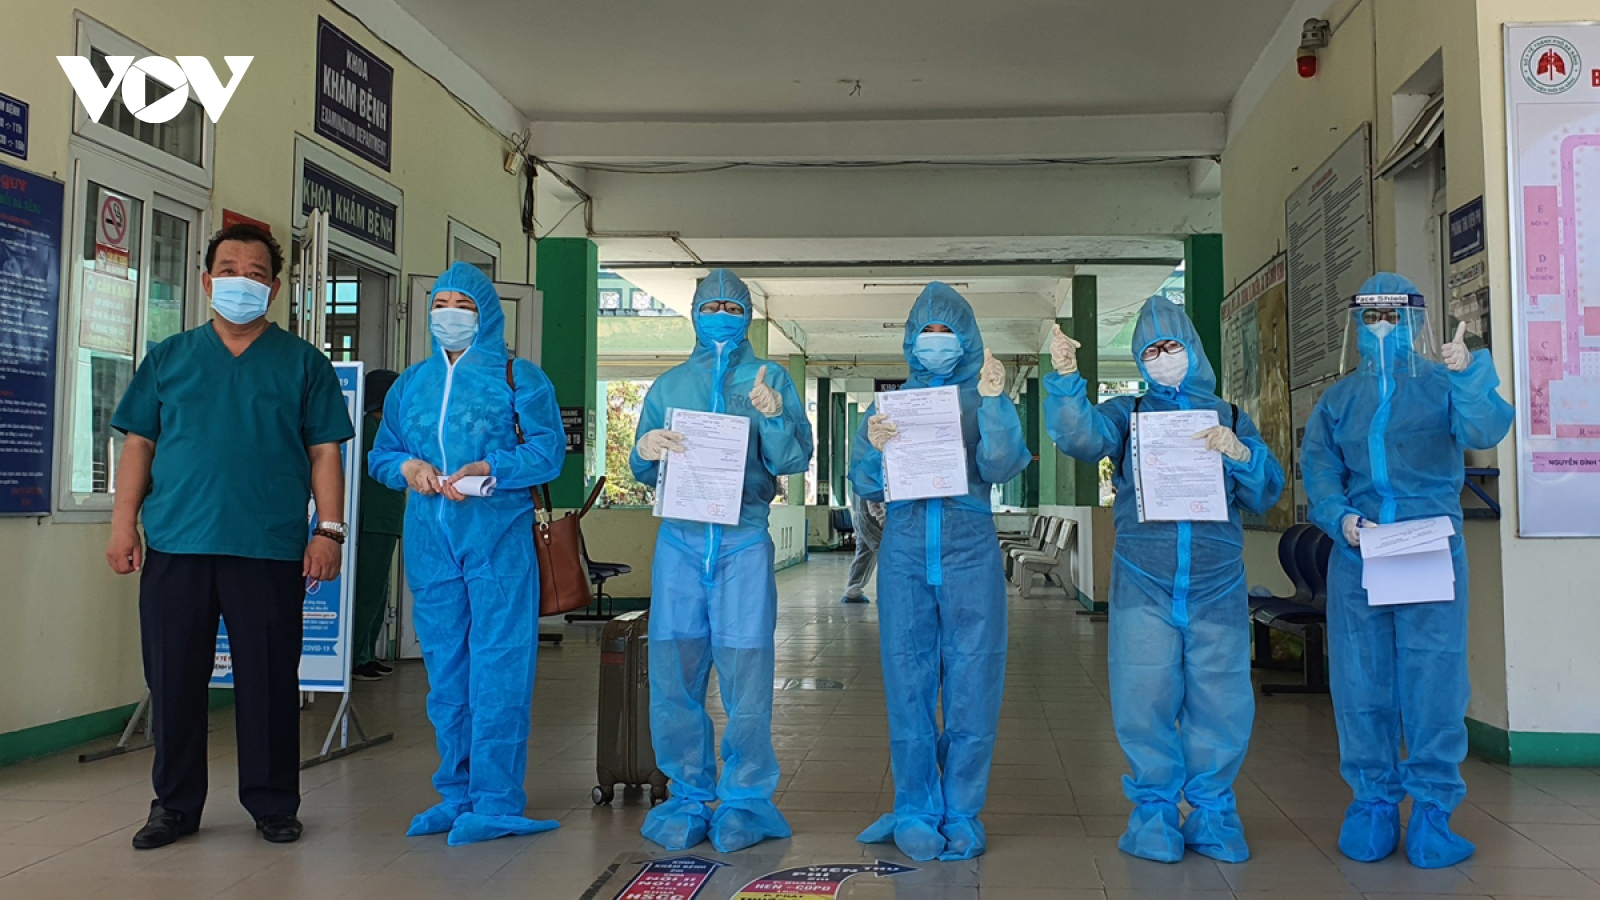 68 more community cases recorded at midday, with 48 in Bac Giang epicenter 